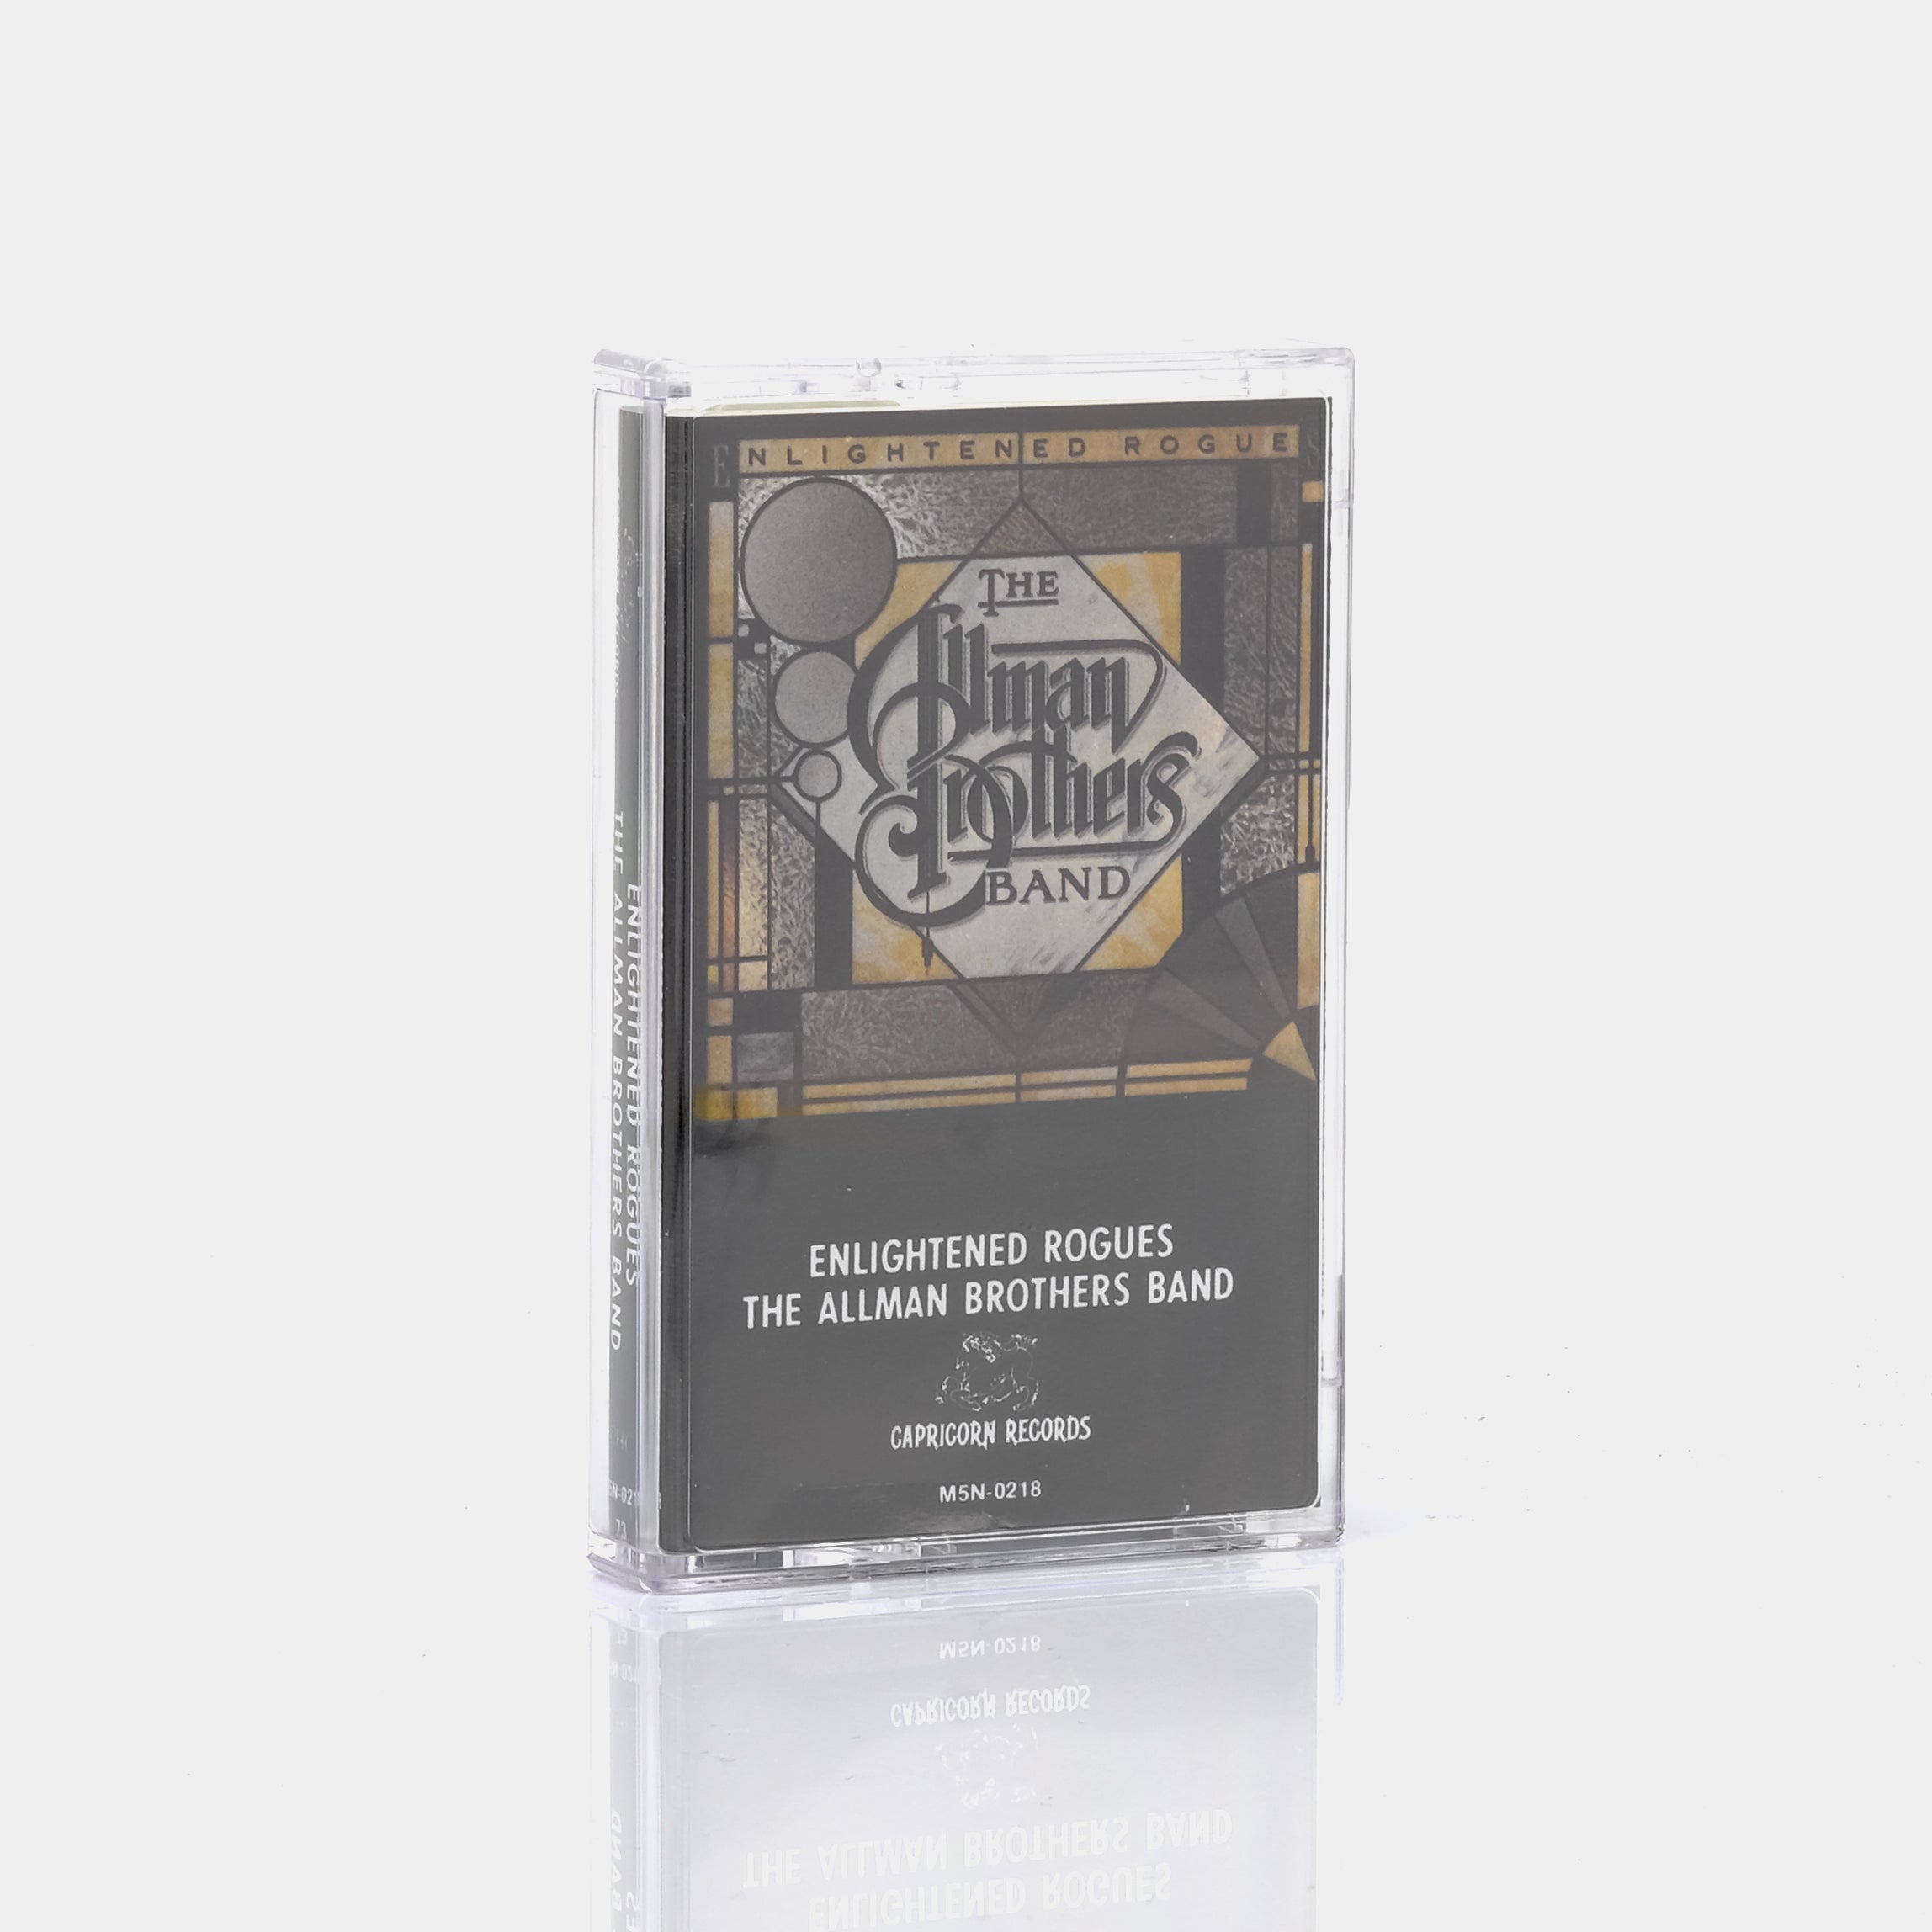 The Allman Brothers Band - Enlightened Rogues Cassette Tape